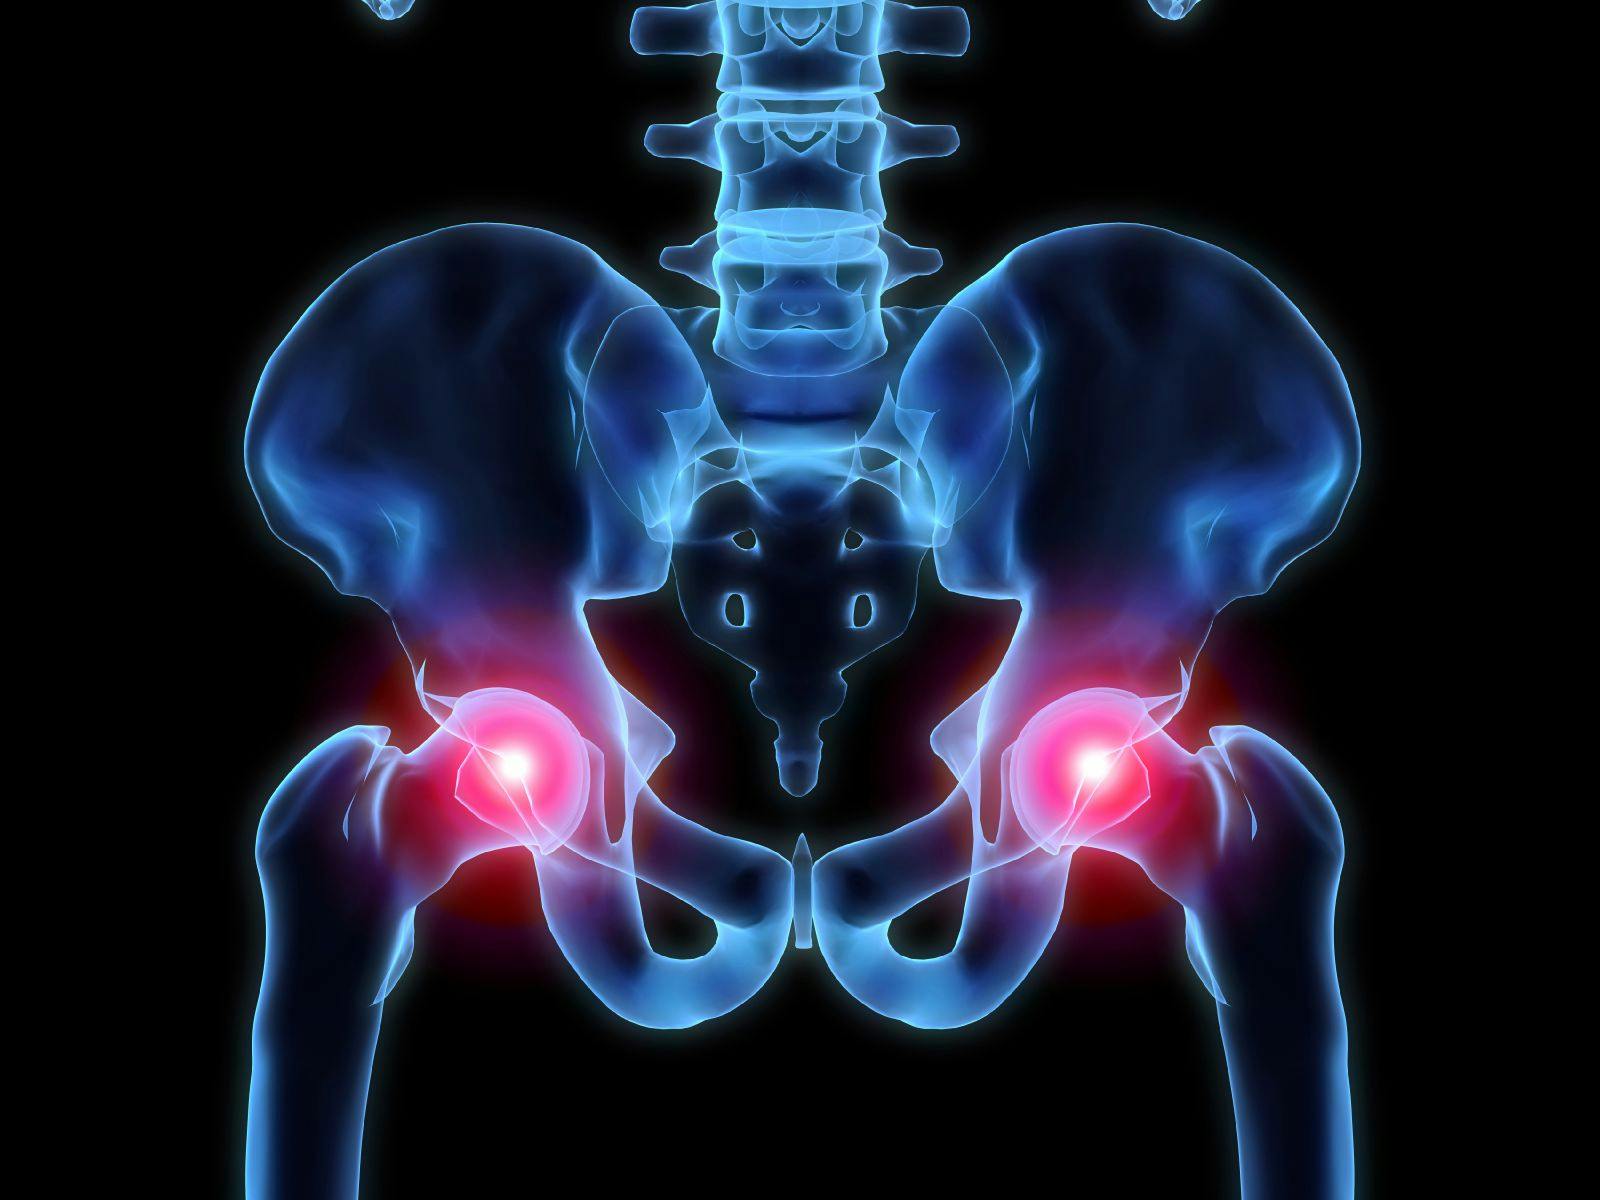  Hip Instability Progresses Most Rapidly in Patients With SMA Type 1